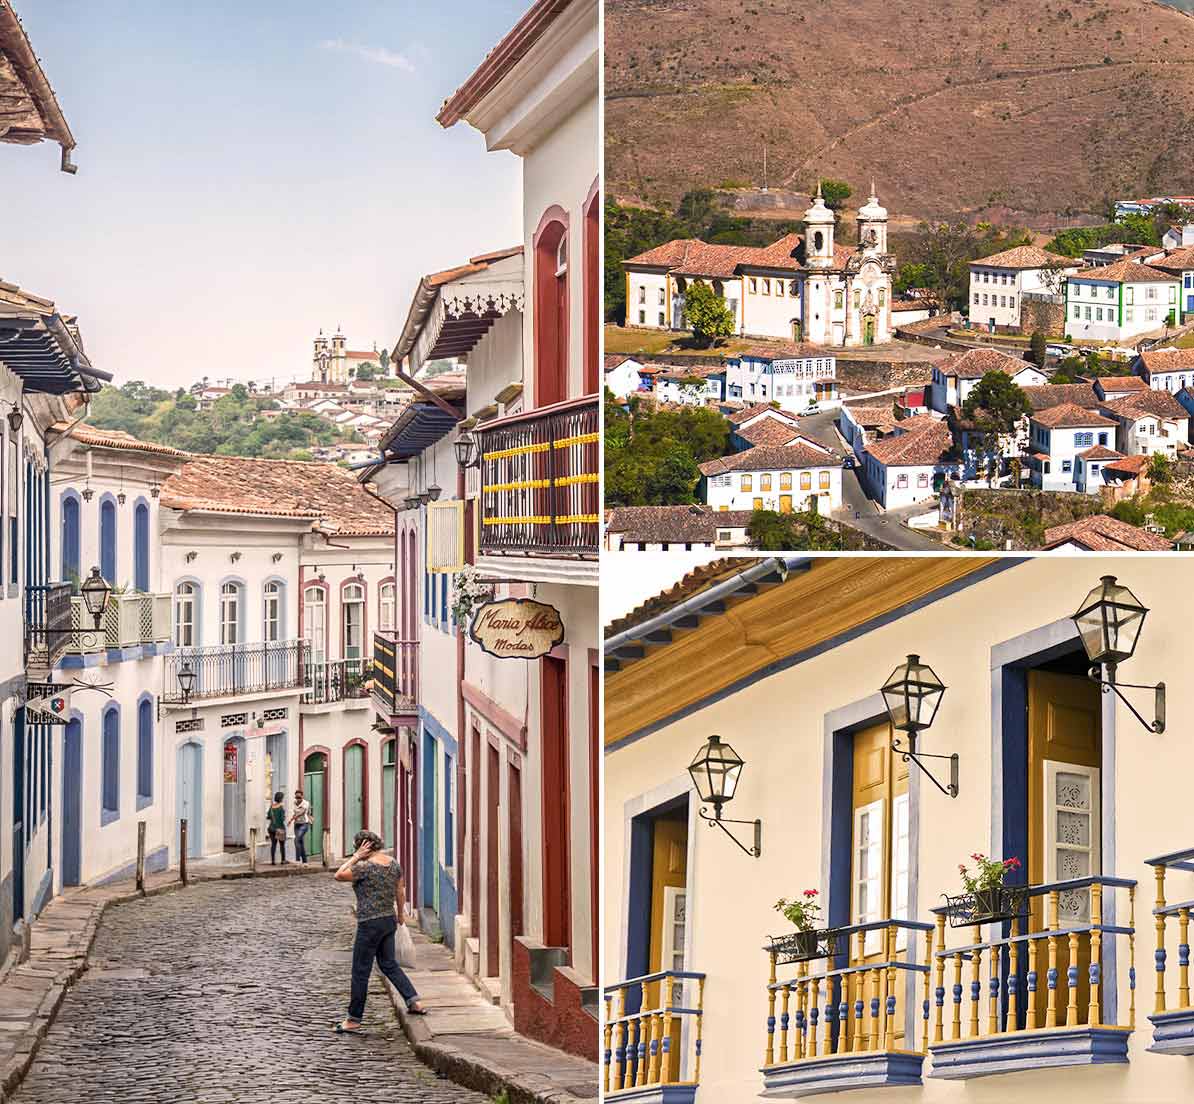 A collage showing a cobblestone street, a view of the rooftops, and some balconies in Ouro Preto.